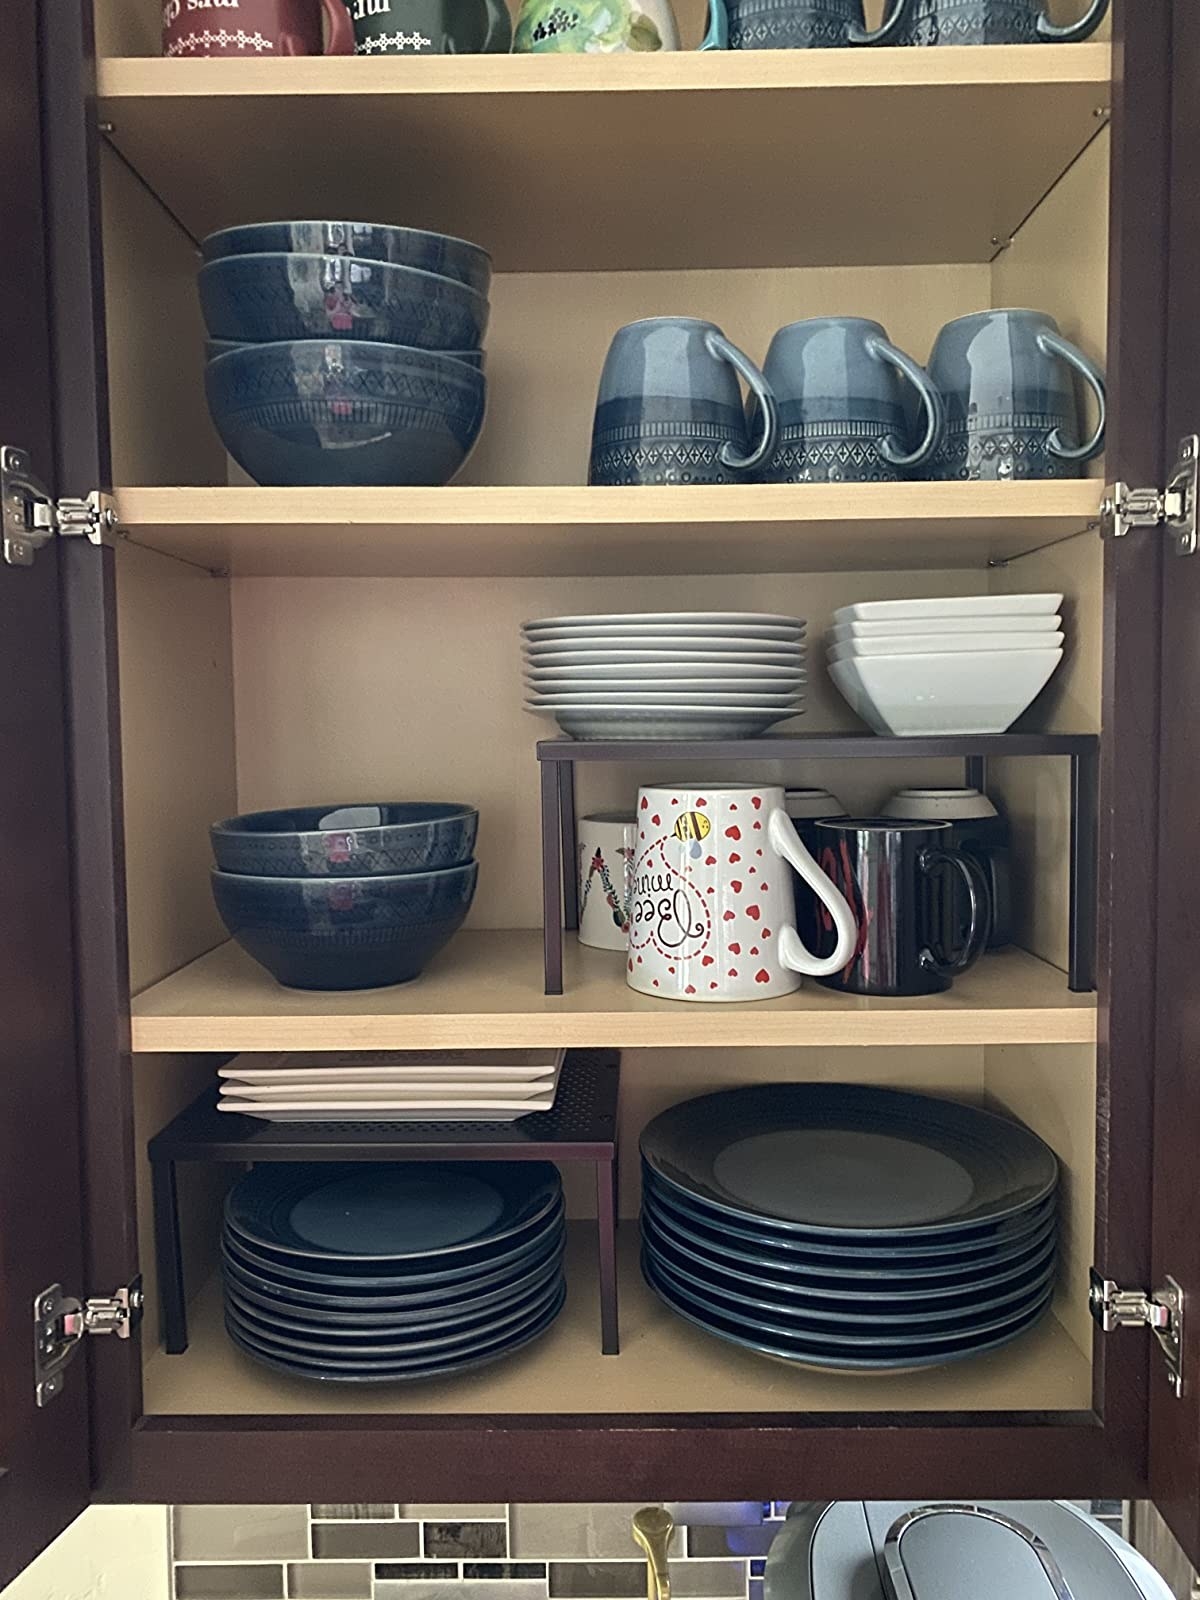 Reviewer image of two shelves used inside a kitchen cabinet with dishes